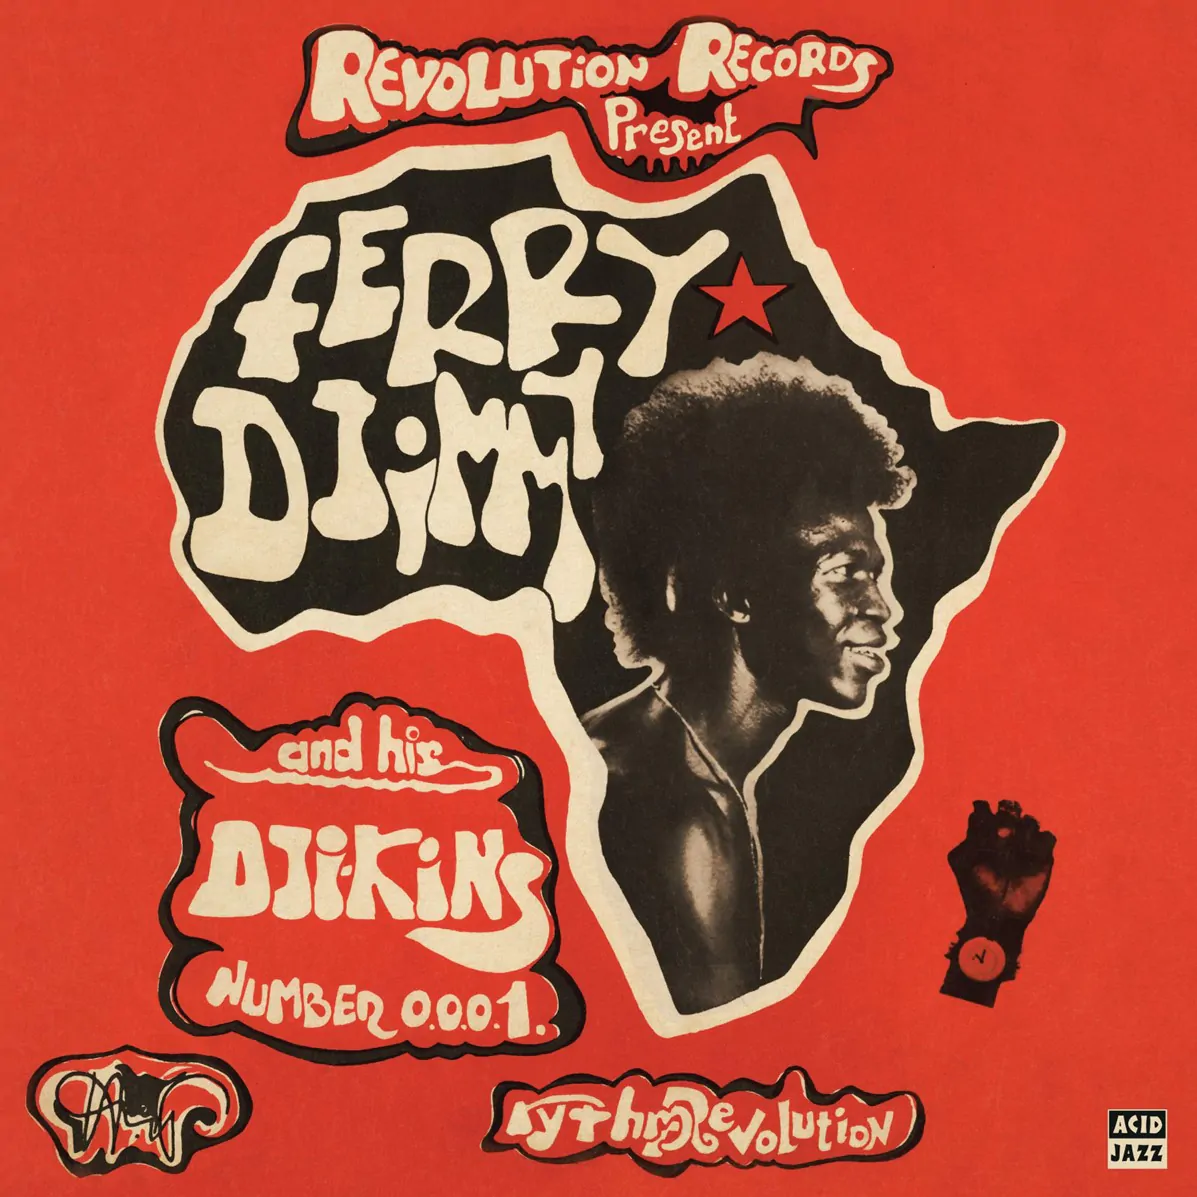 Acid Jazz announces the release of Ferry Djimmy’s ‘Rhythm Revolution’ – out on July 1st